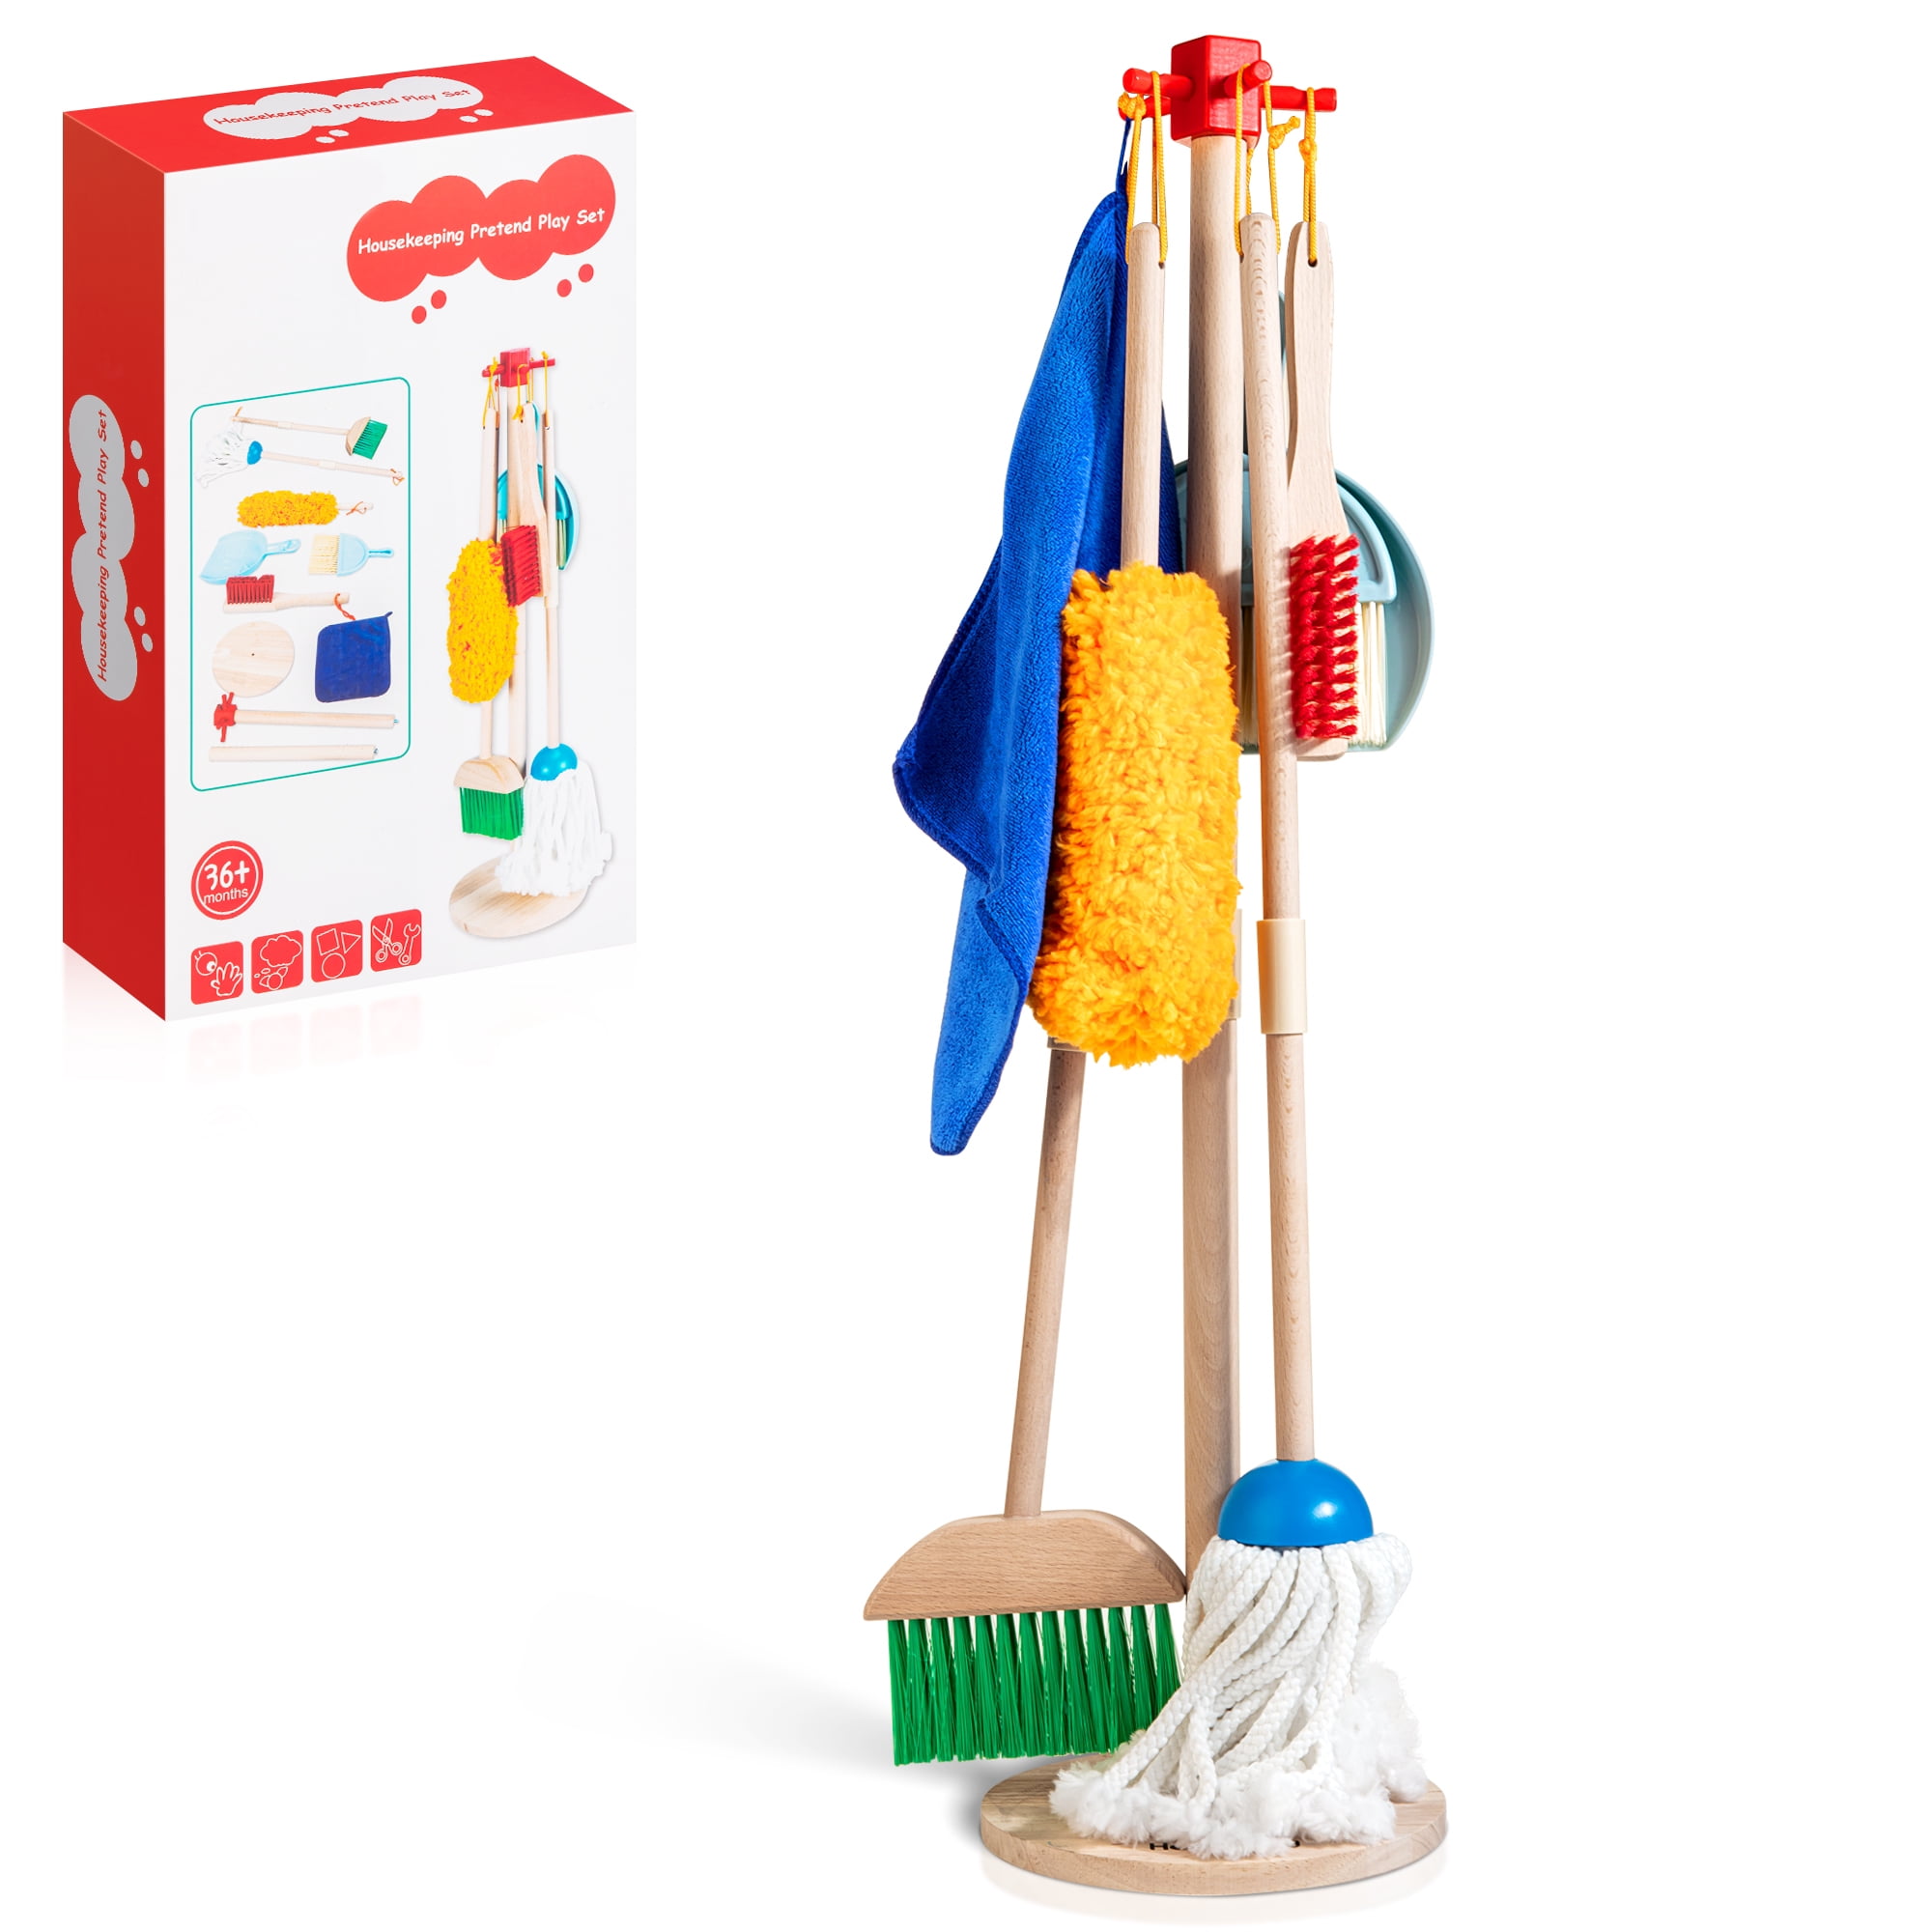 SDJMa Kids Cleaning Set 10 Piece - Toy Cleaning Set Includes Broom, Mop,  Brush, Dust Pan, Soap, Sponge, Spray, Bucket, - Toy Kitchen Toddler  Cleaning Set 